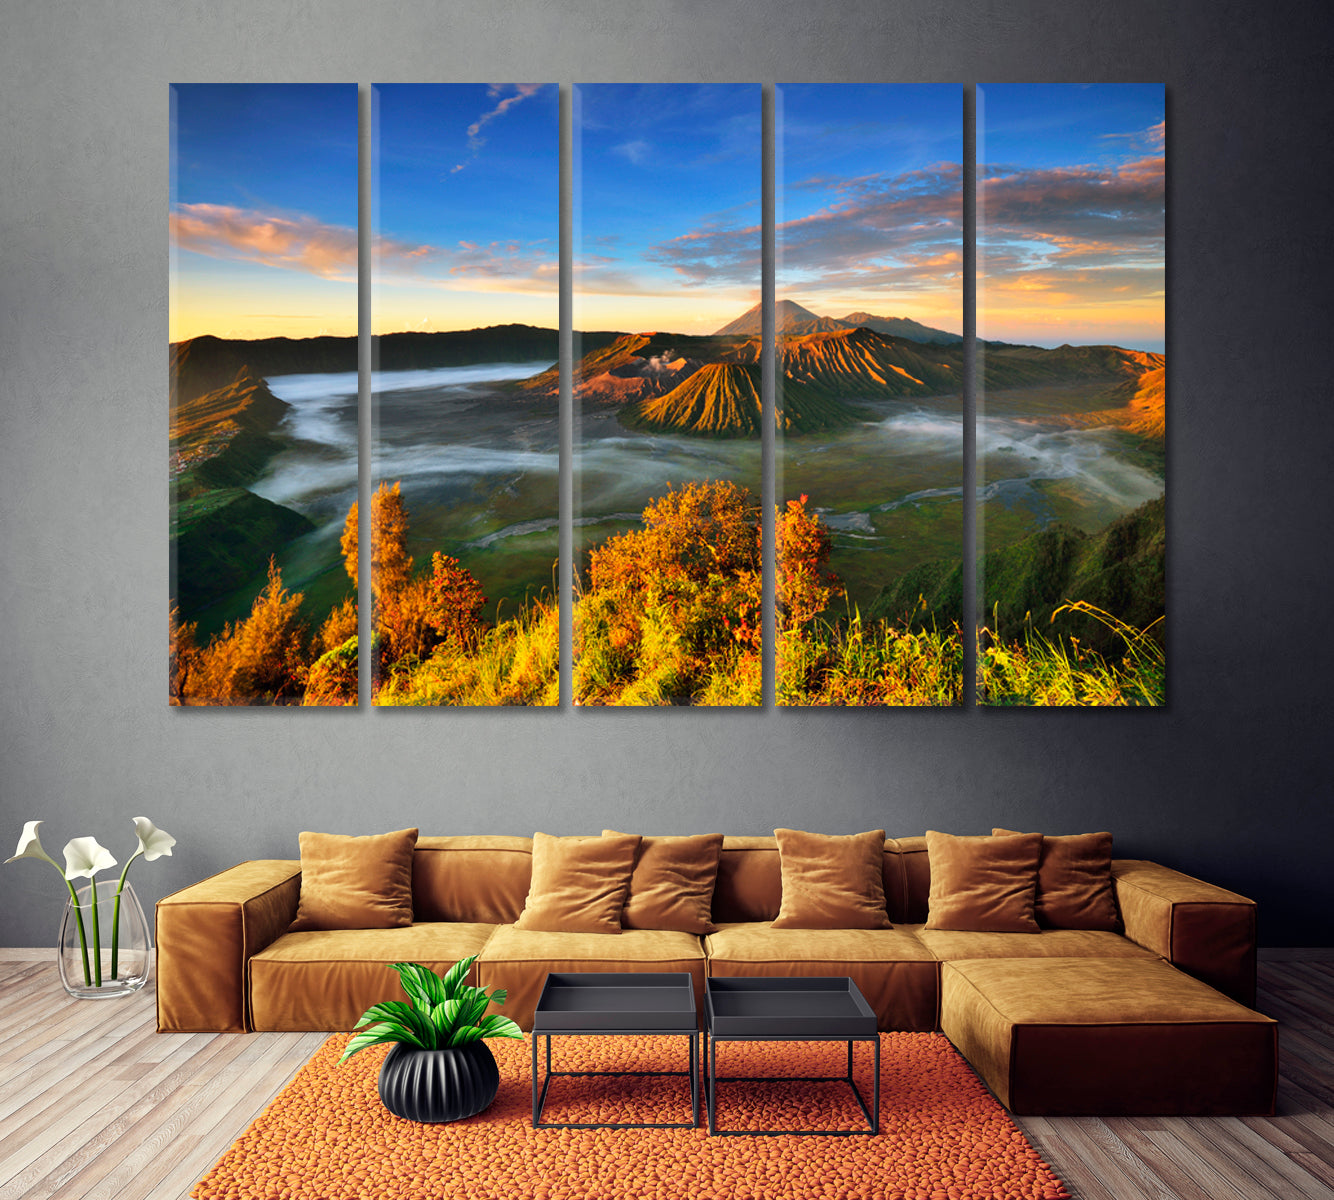 Sunrise on Mount Bromo in East Java Indonesia Canvas Print ArtLexy 5 Panels 36"x24" inches 